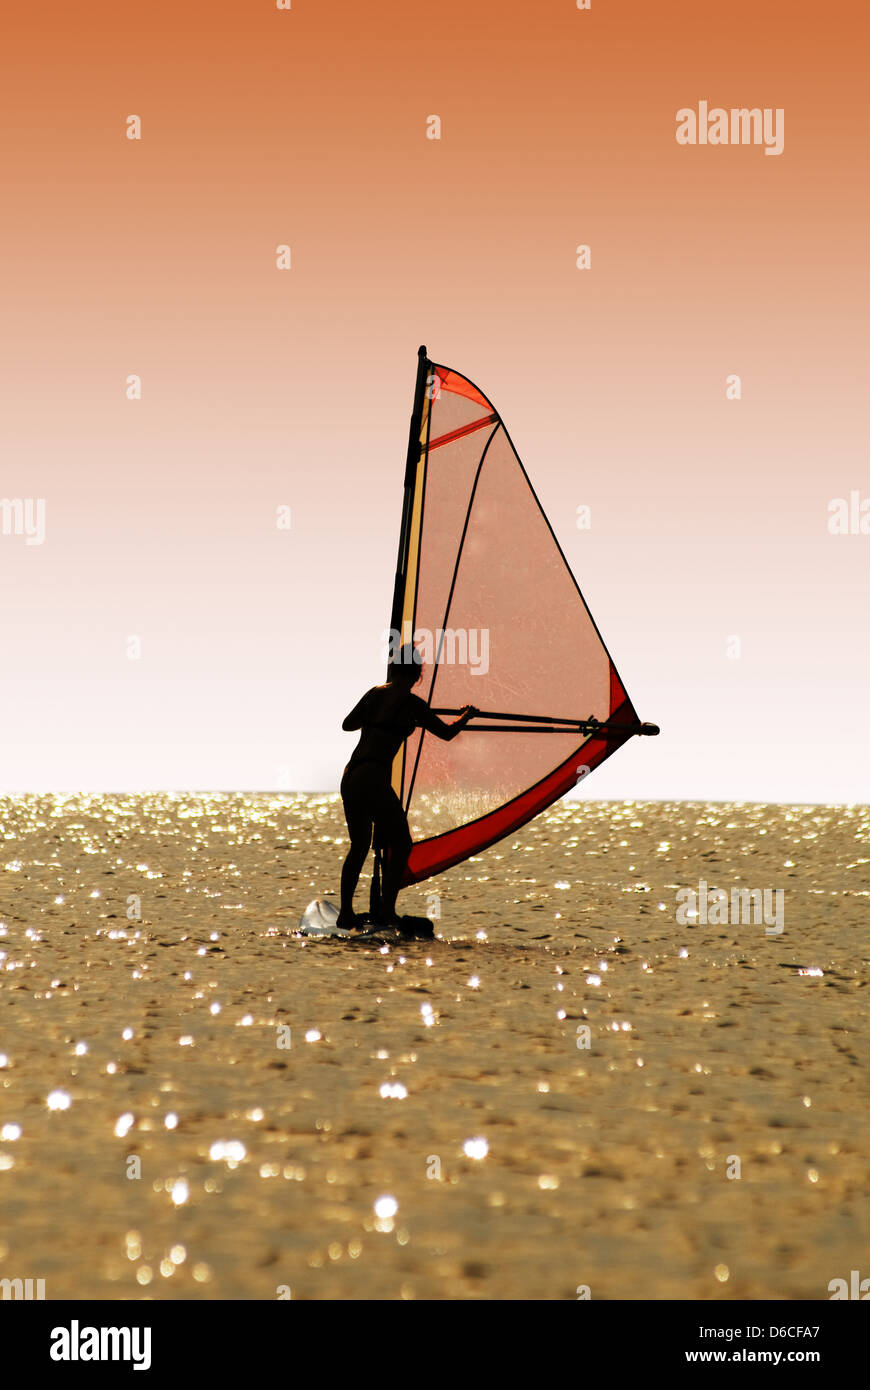 Silhouette a women on a windsurf on waves Stock Photo